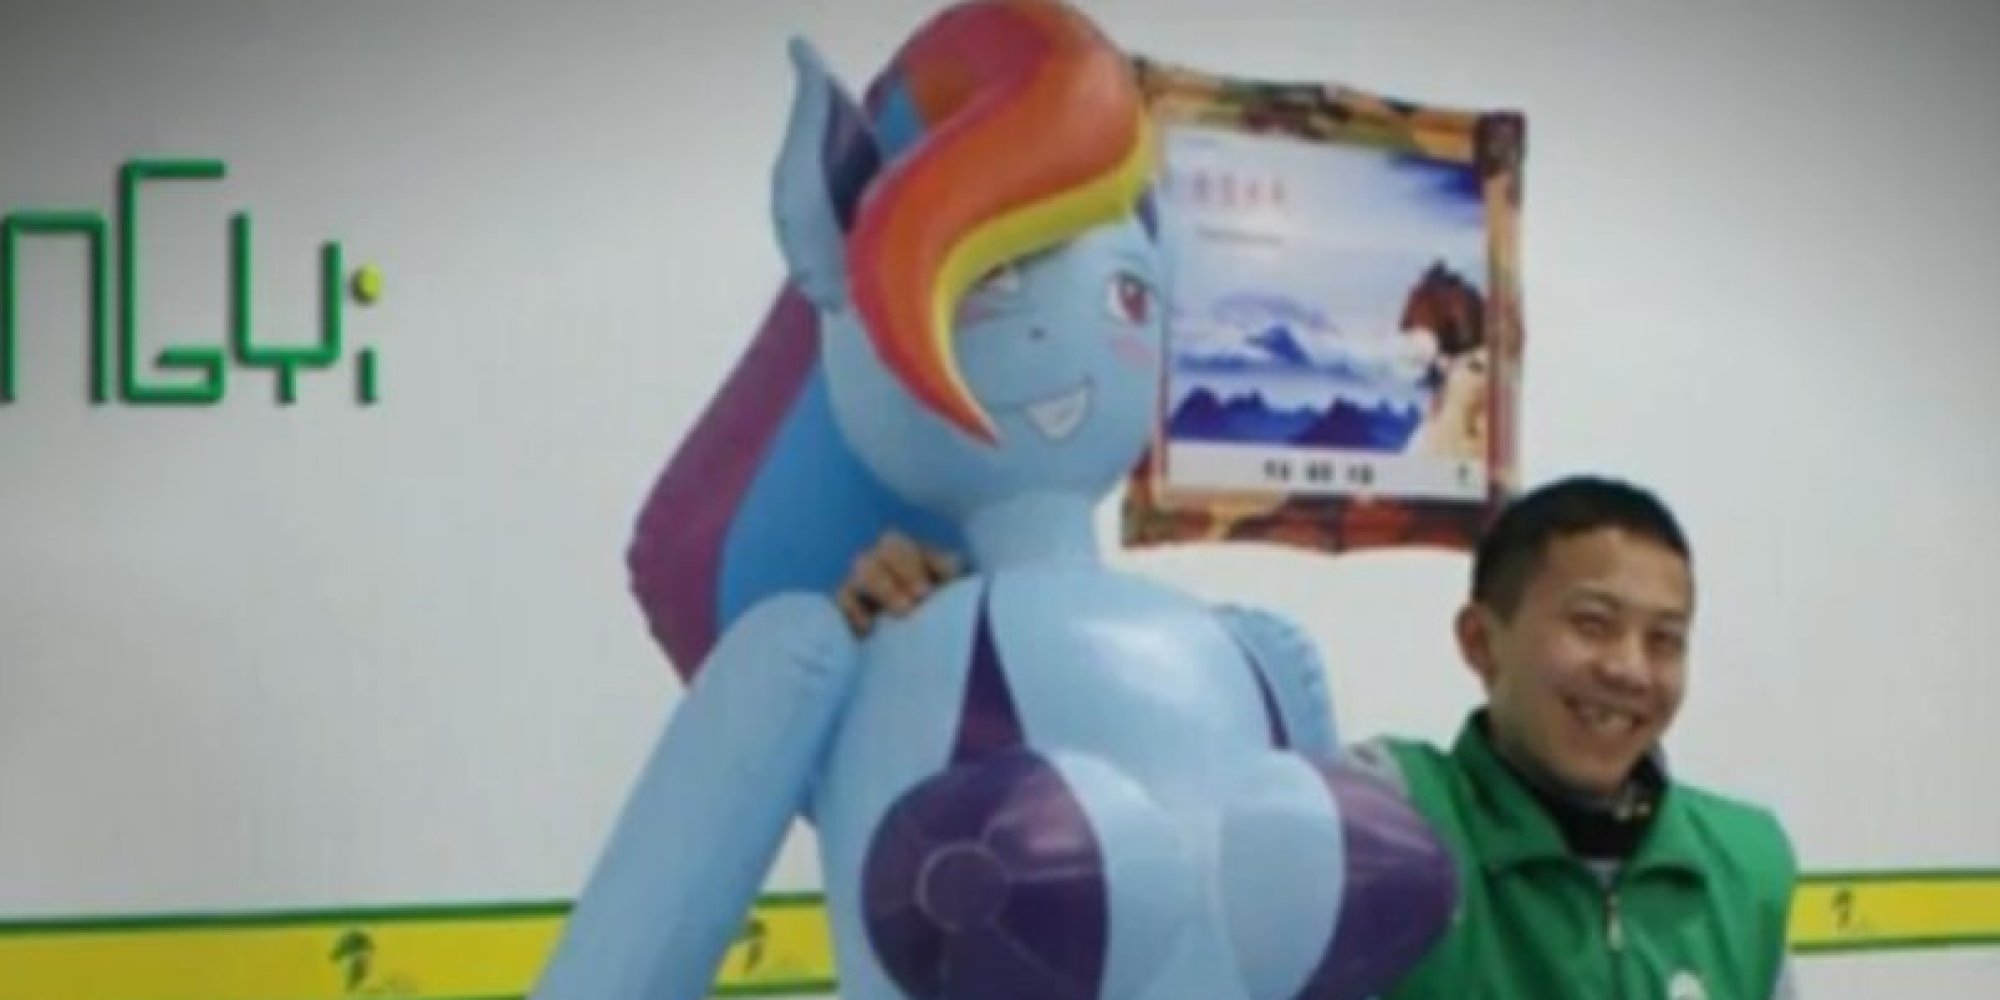 Inflatable LifeSize My Little Pony Doll Arousing Controversy With